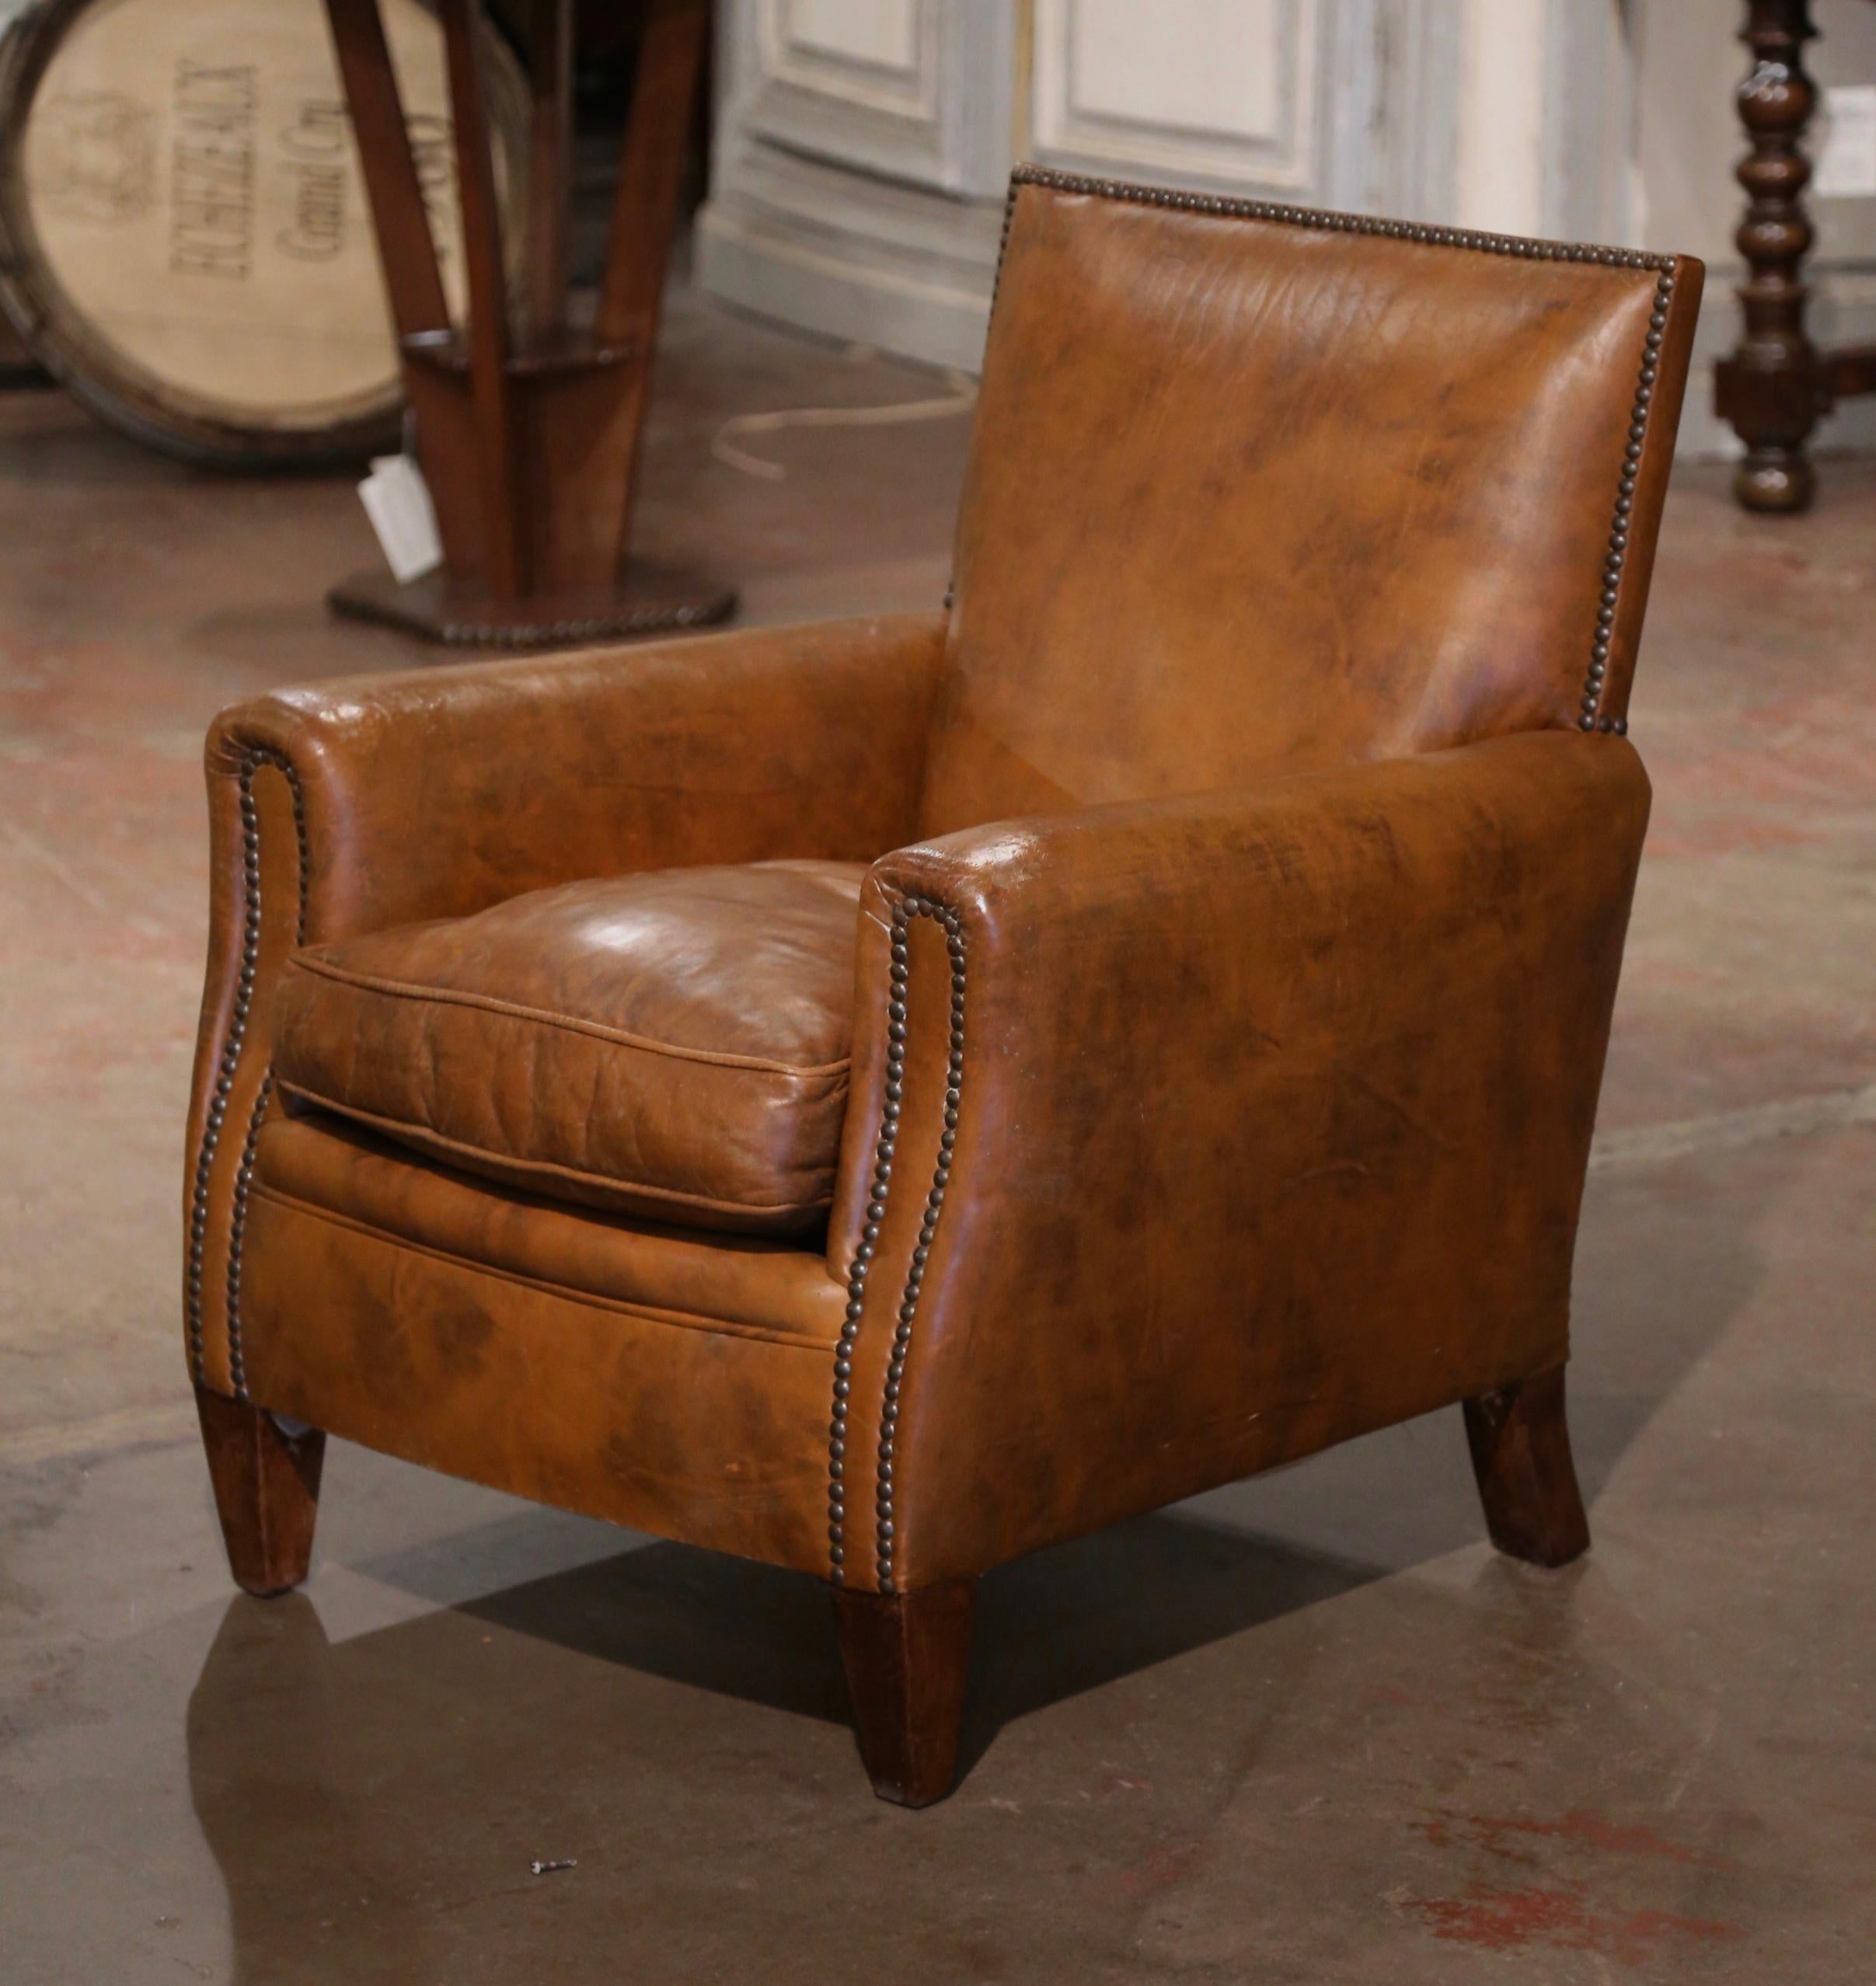 This Classic, antique Art Deco club chair was crafted in France, circa 1320. The stately chair stands on tapered wooden feet and features wide, rounded armrests, a pitch back with a flat top shape, and a deep loose seat cushion. The Classic,